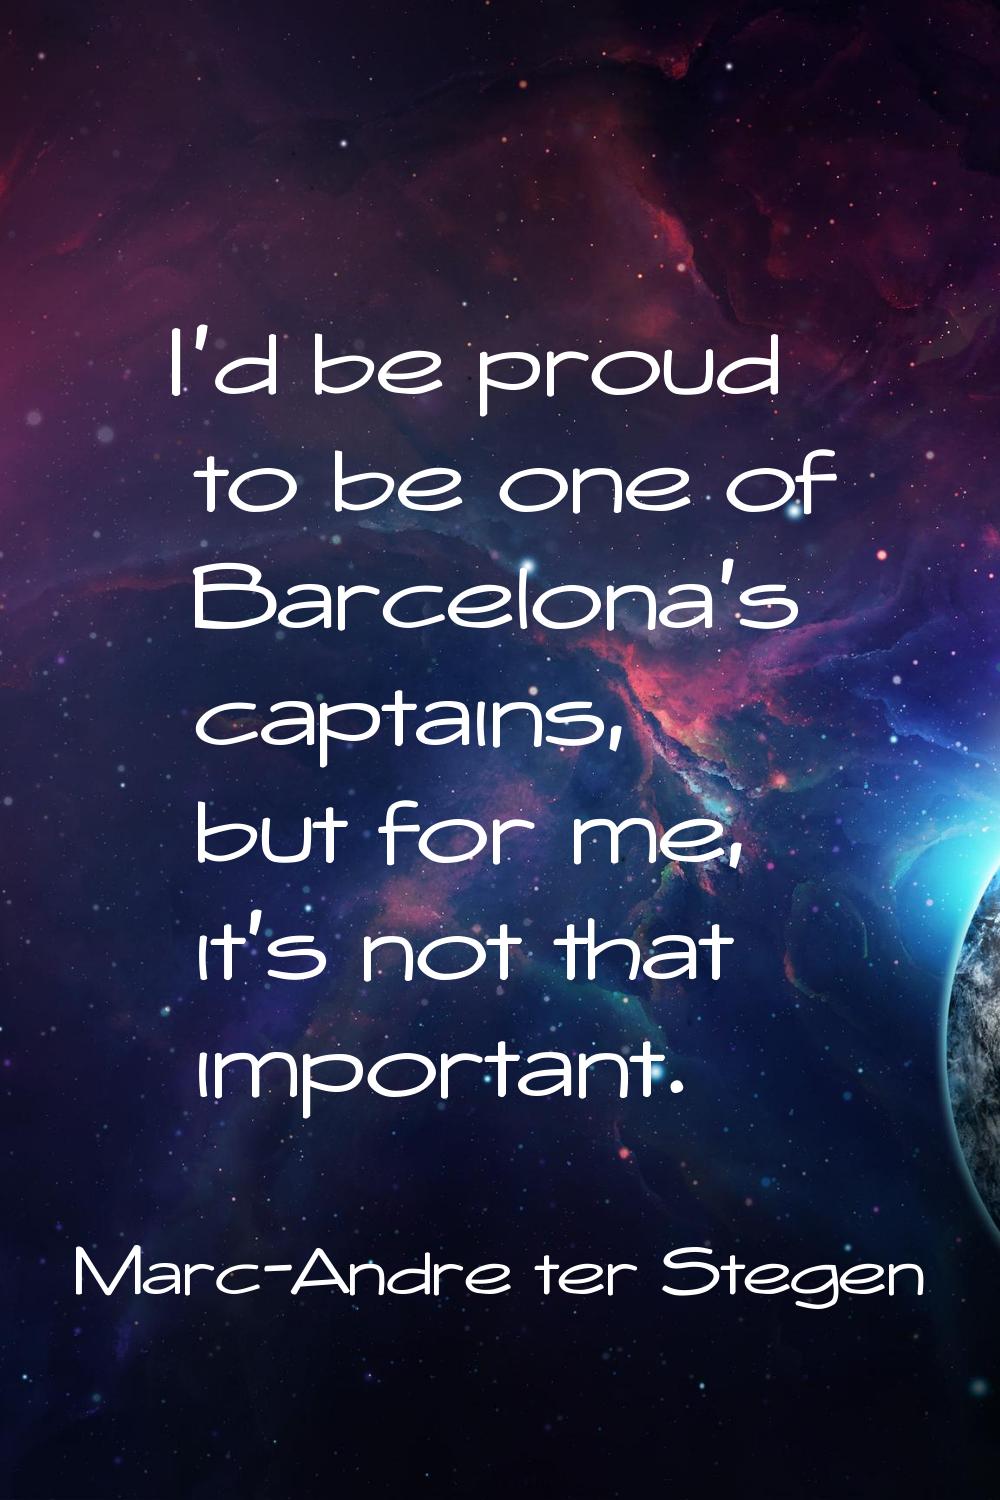 I'd be proud to be one of Barcelona's captains, but for me, it's not that important.